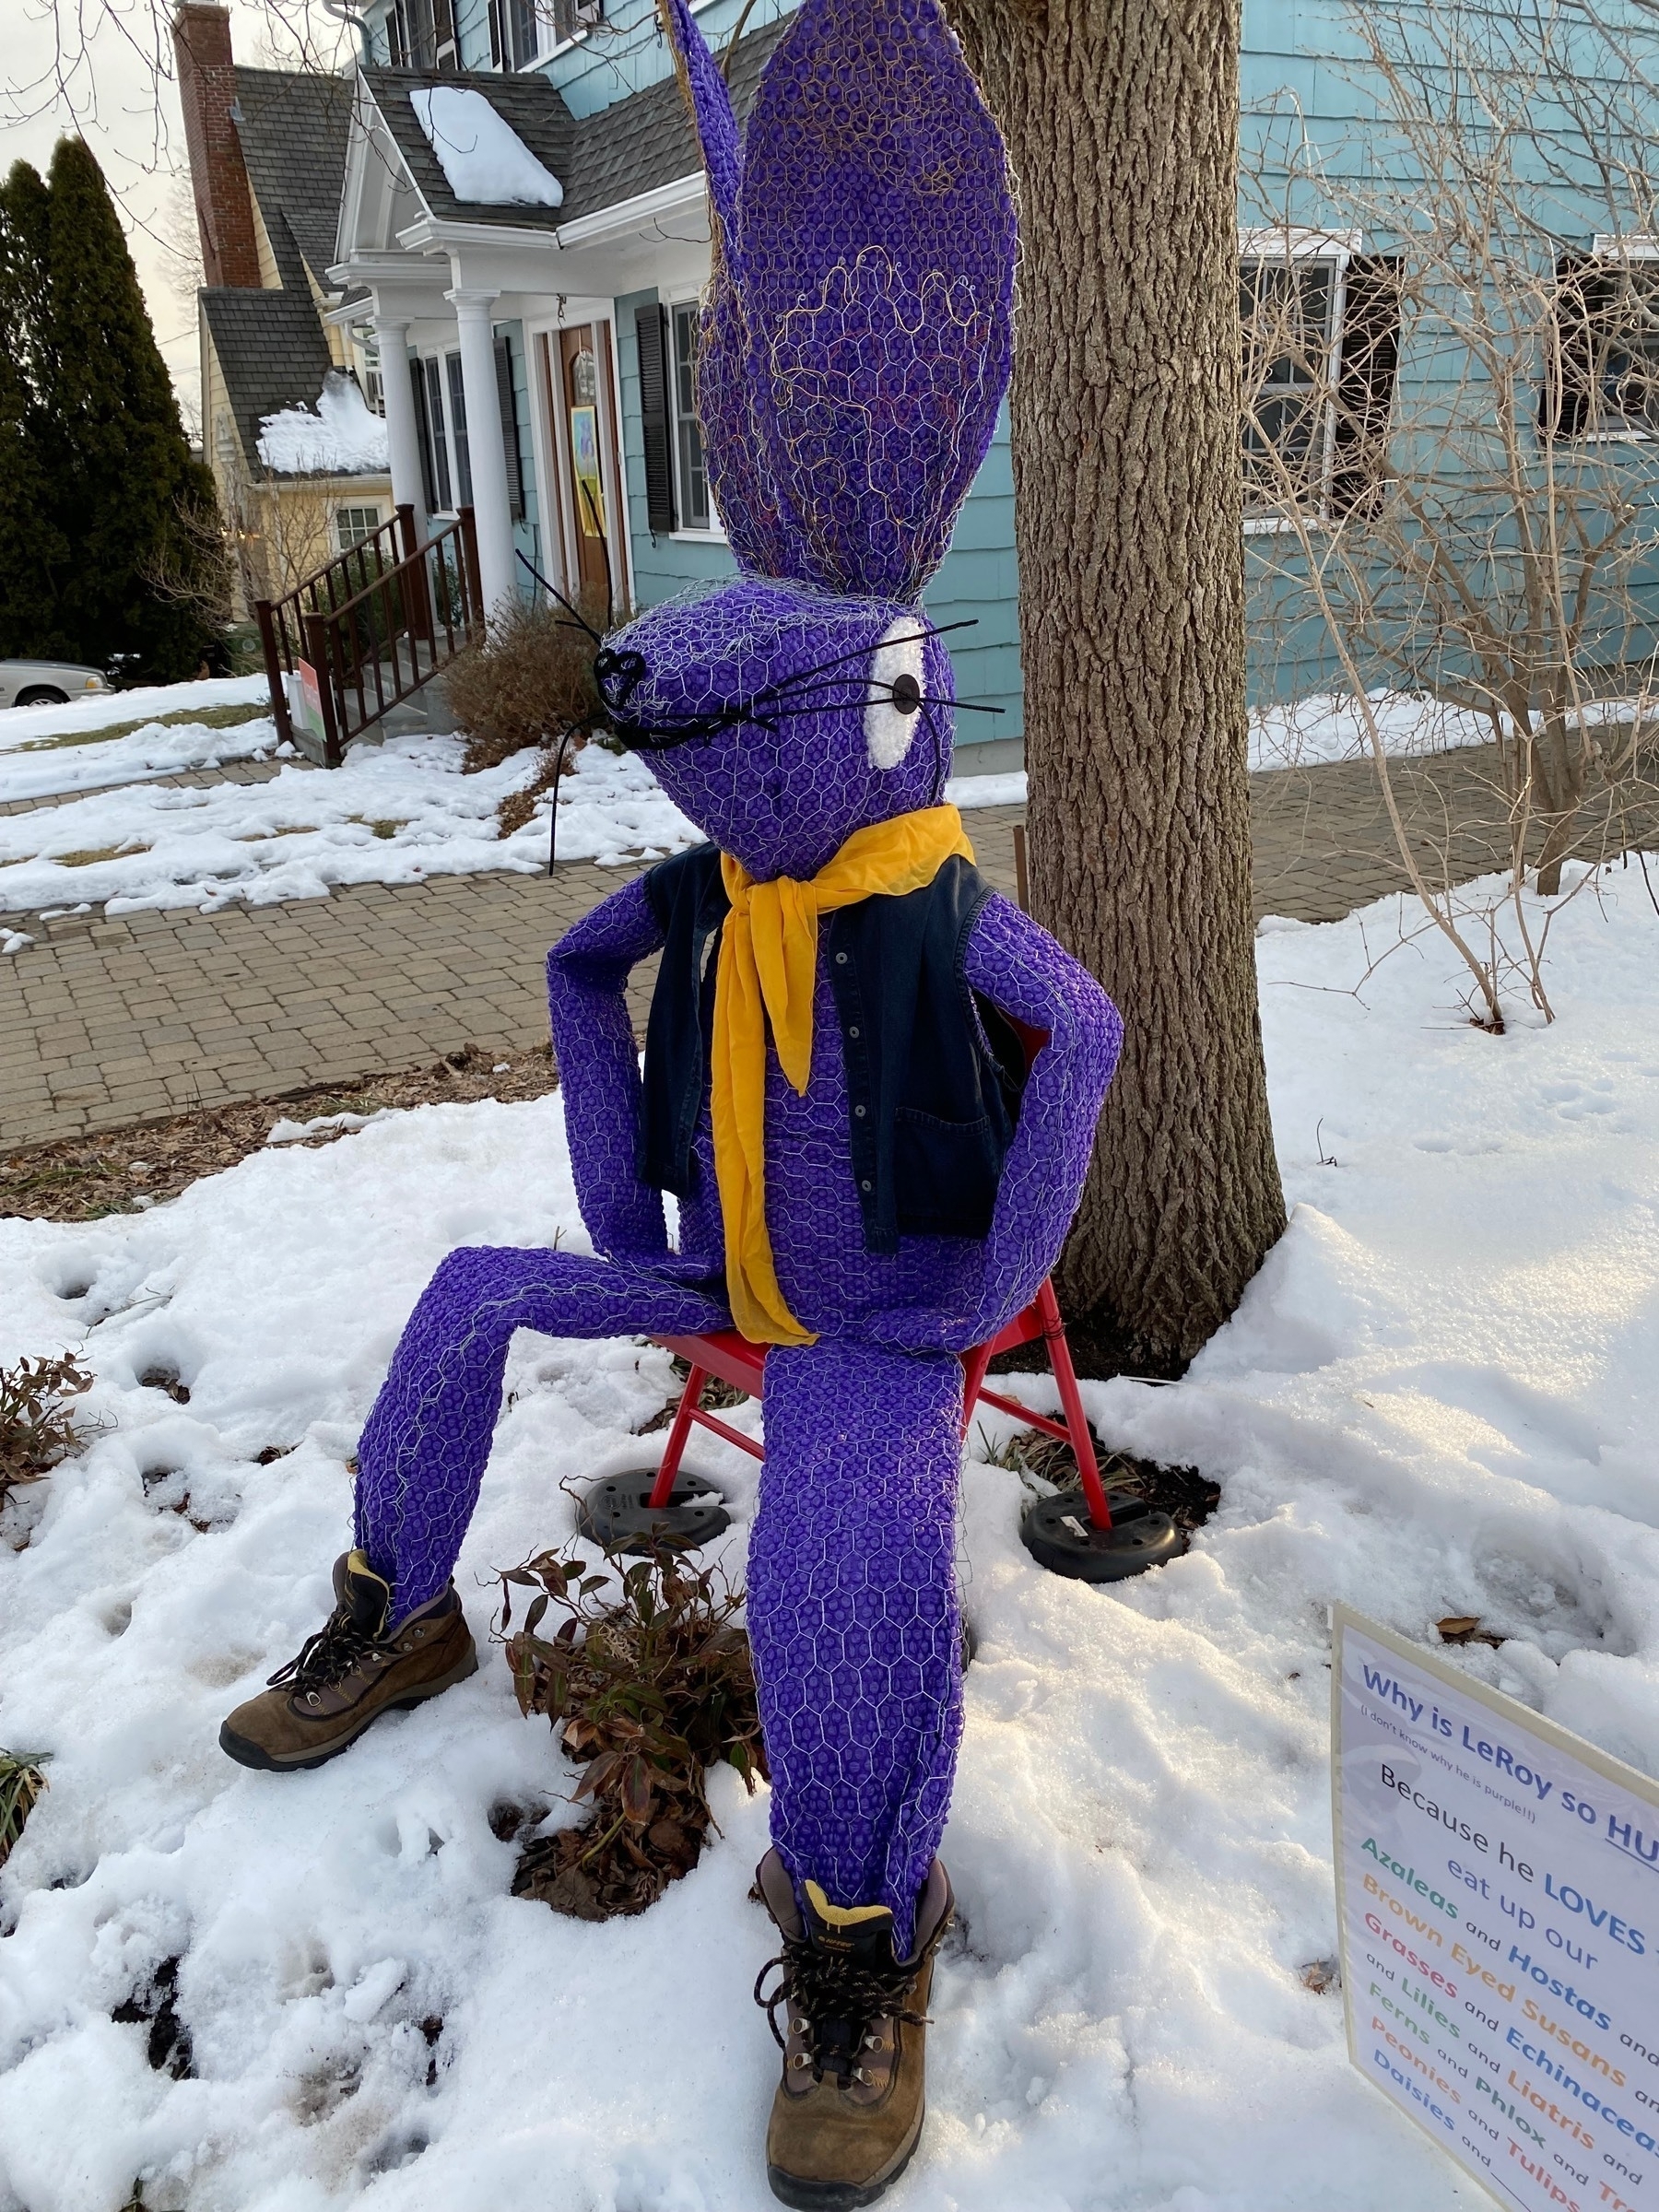 A cloth sculpture in the shape of a purple rabbit, wearing a vest, scarf, and boots.